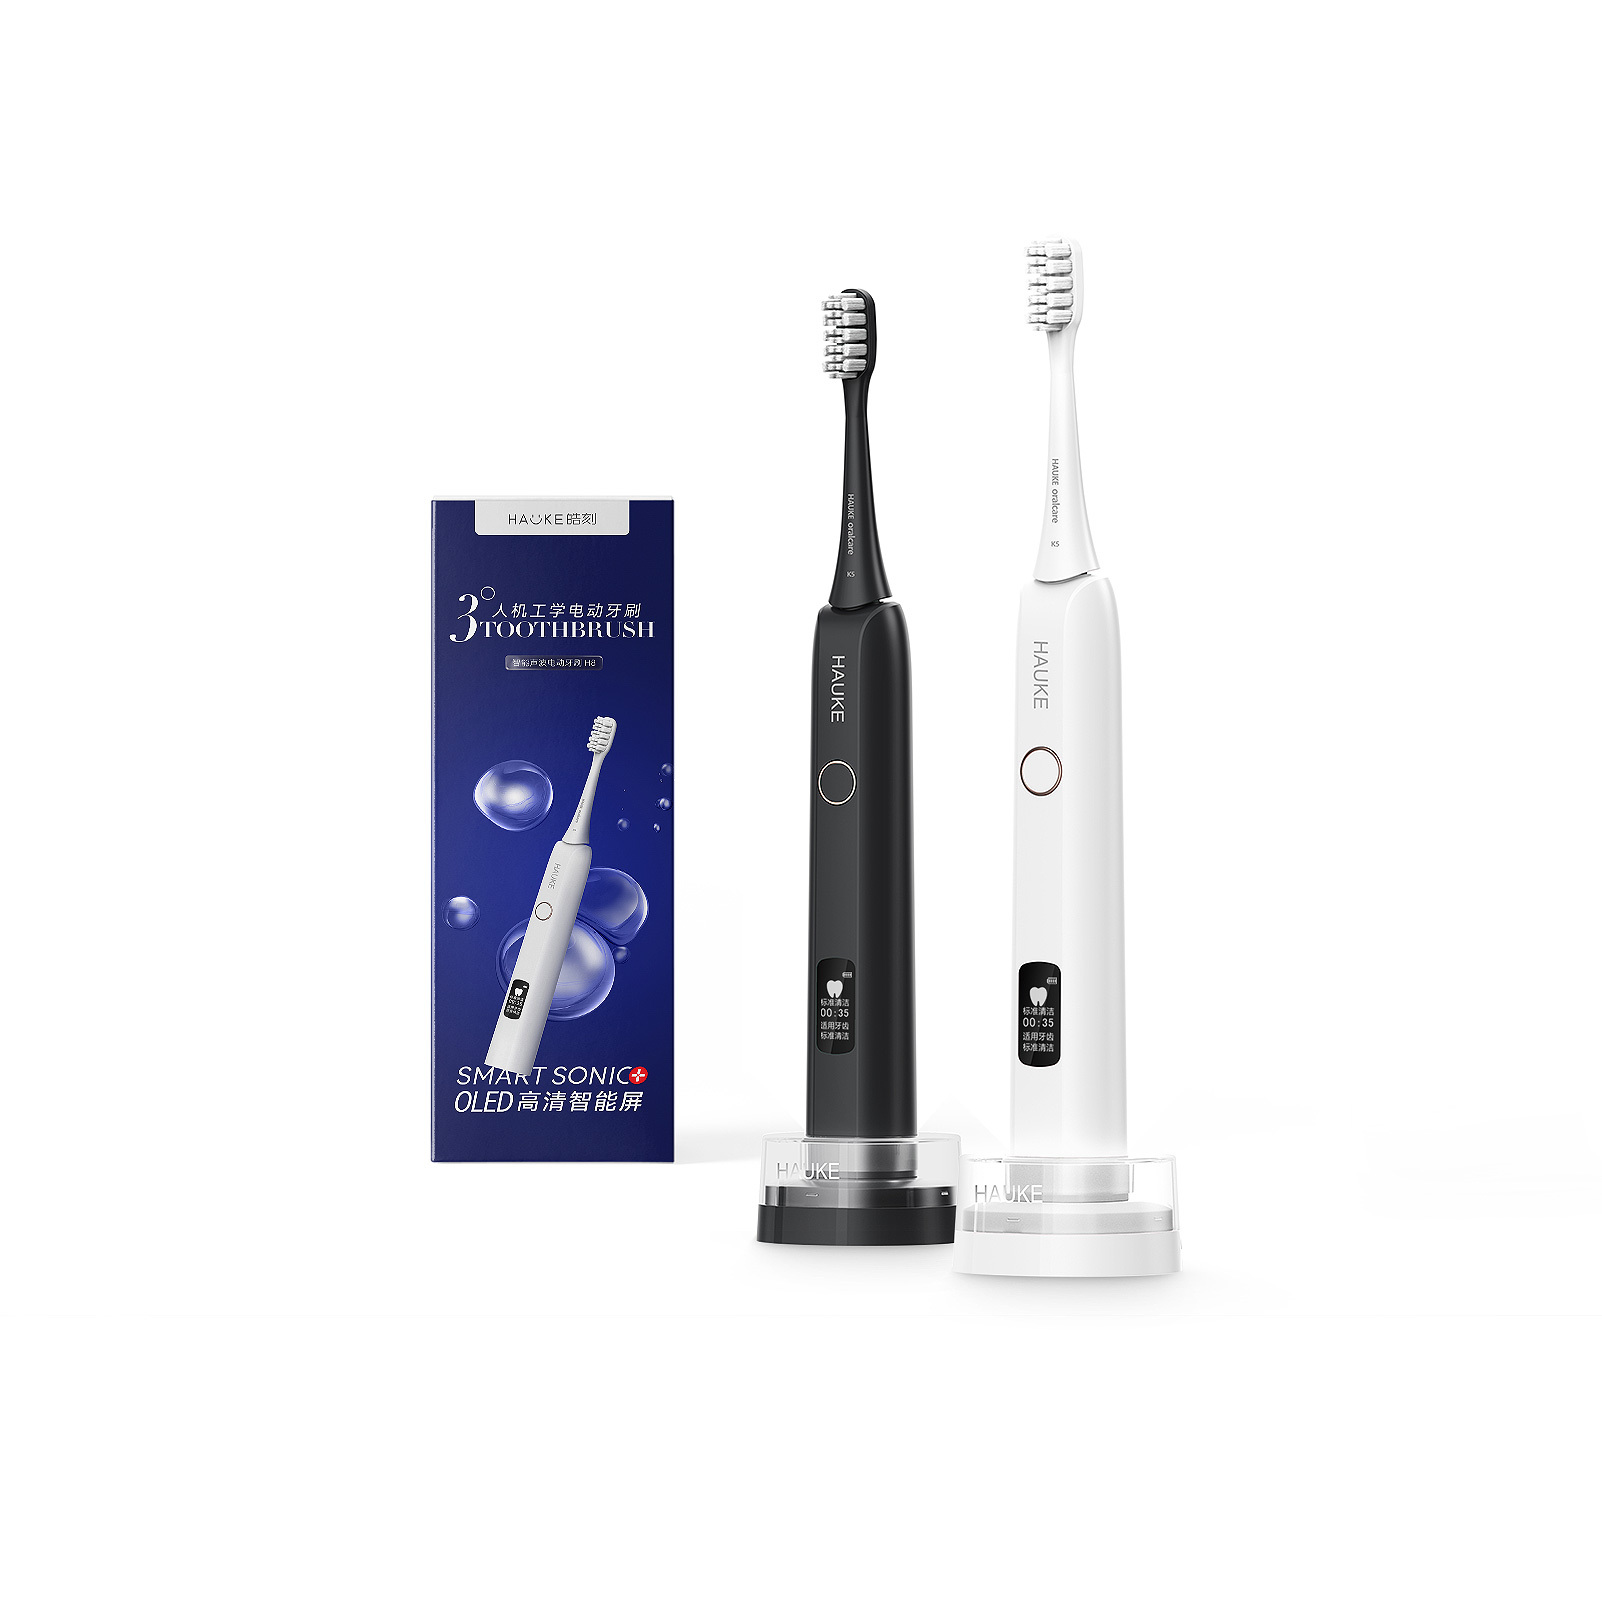 Ultrasonic electric toothbrush, sonicare electric toothbrush for adults